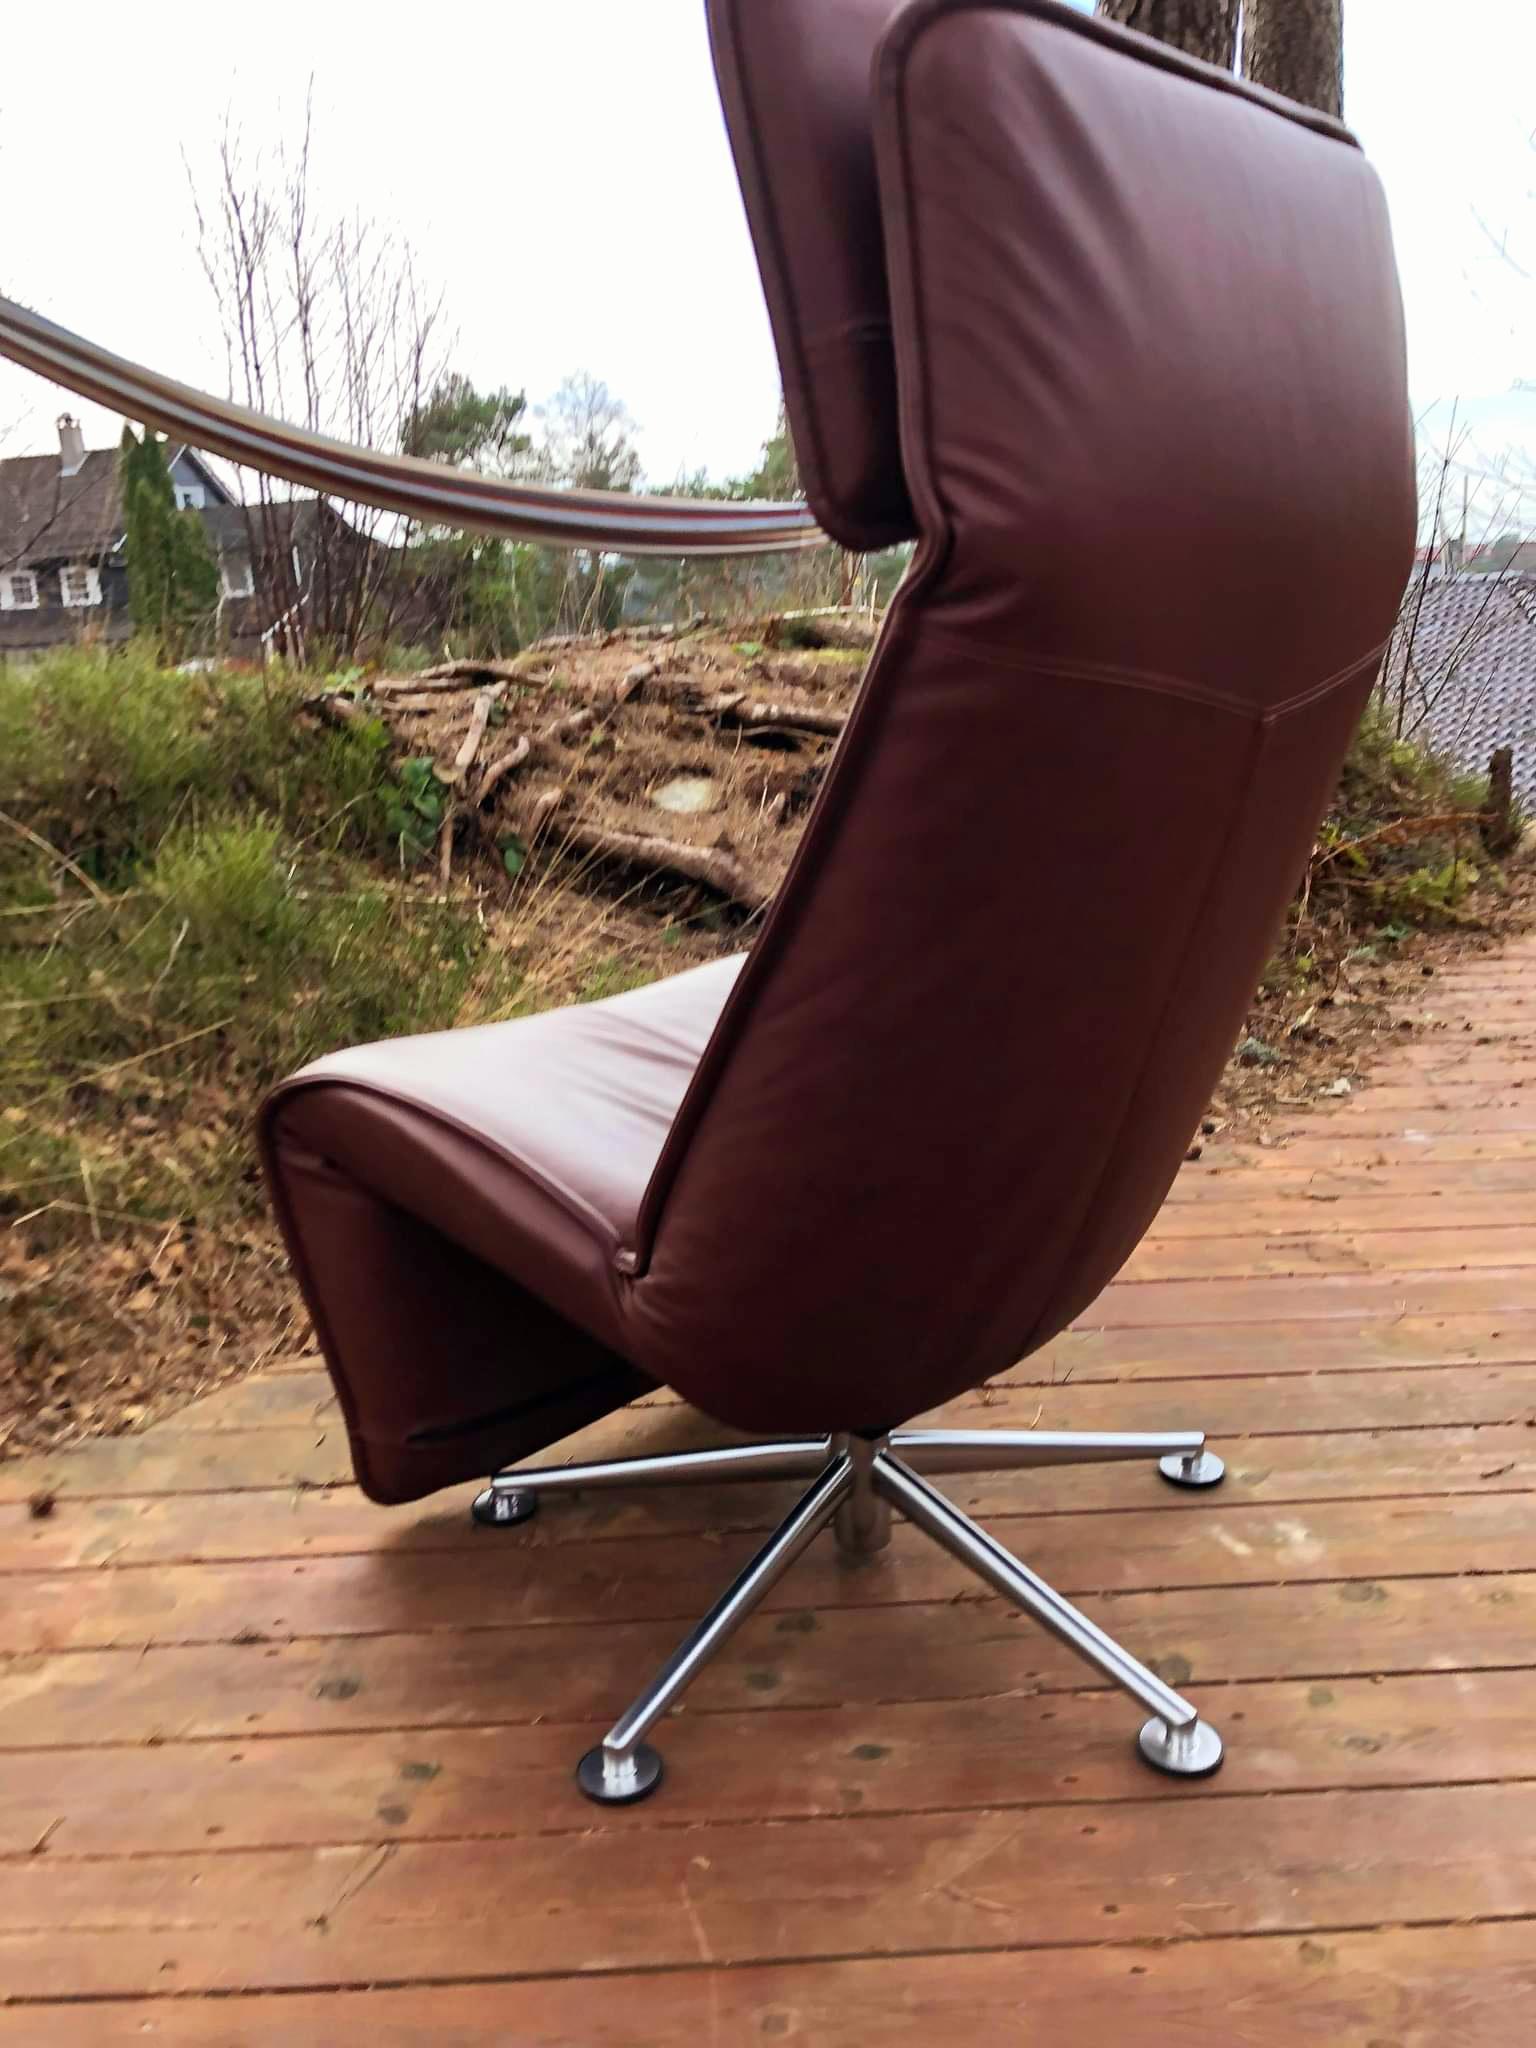 2 Armchairs in whisky brown leather on aluminium base.
Chairs have many adjustments such as back recliner, neck recliner, and adjustable pillow for the neck.
Can rotate 360 degrees, making you feel like levitating on a cloud.
Both are in really good